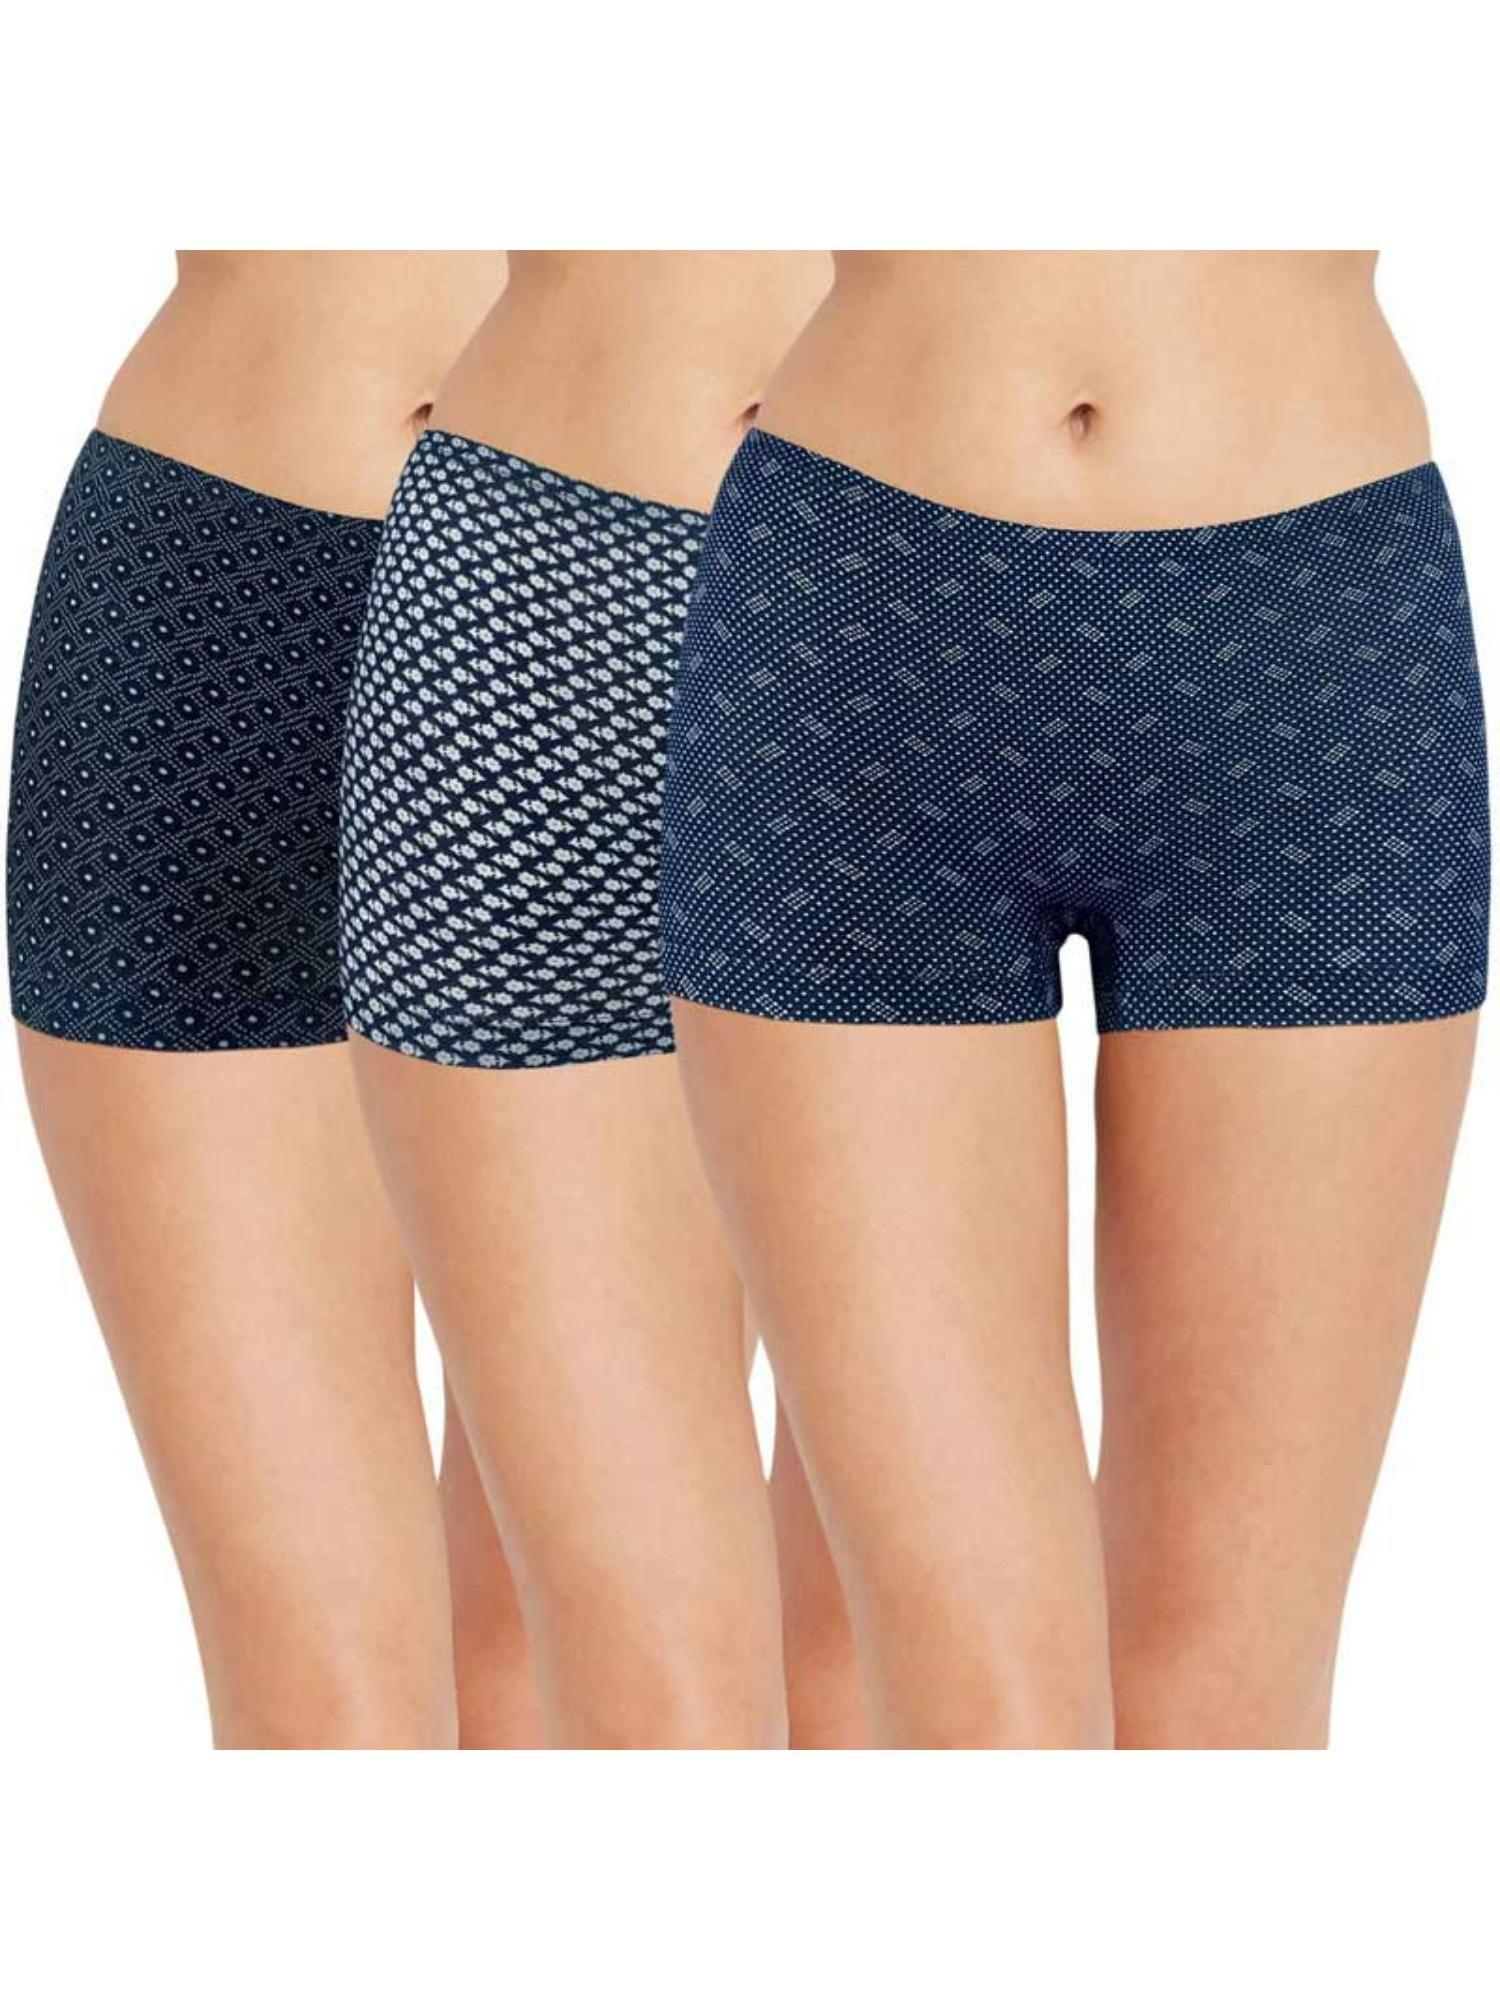 women's printed cotton boy shorts in pack of 3 - multi-color